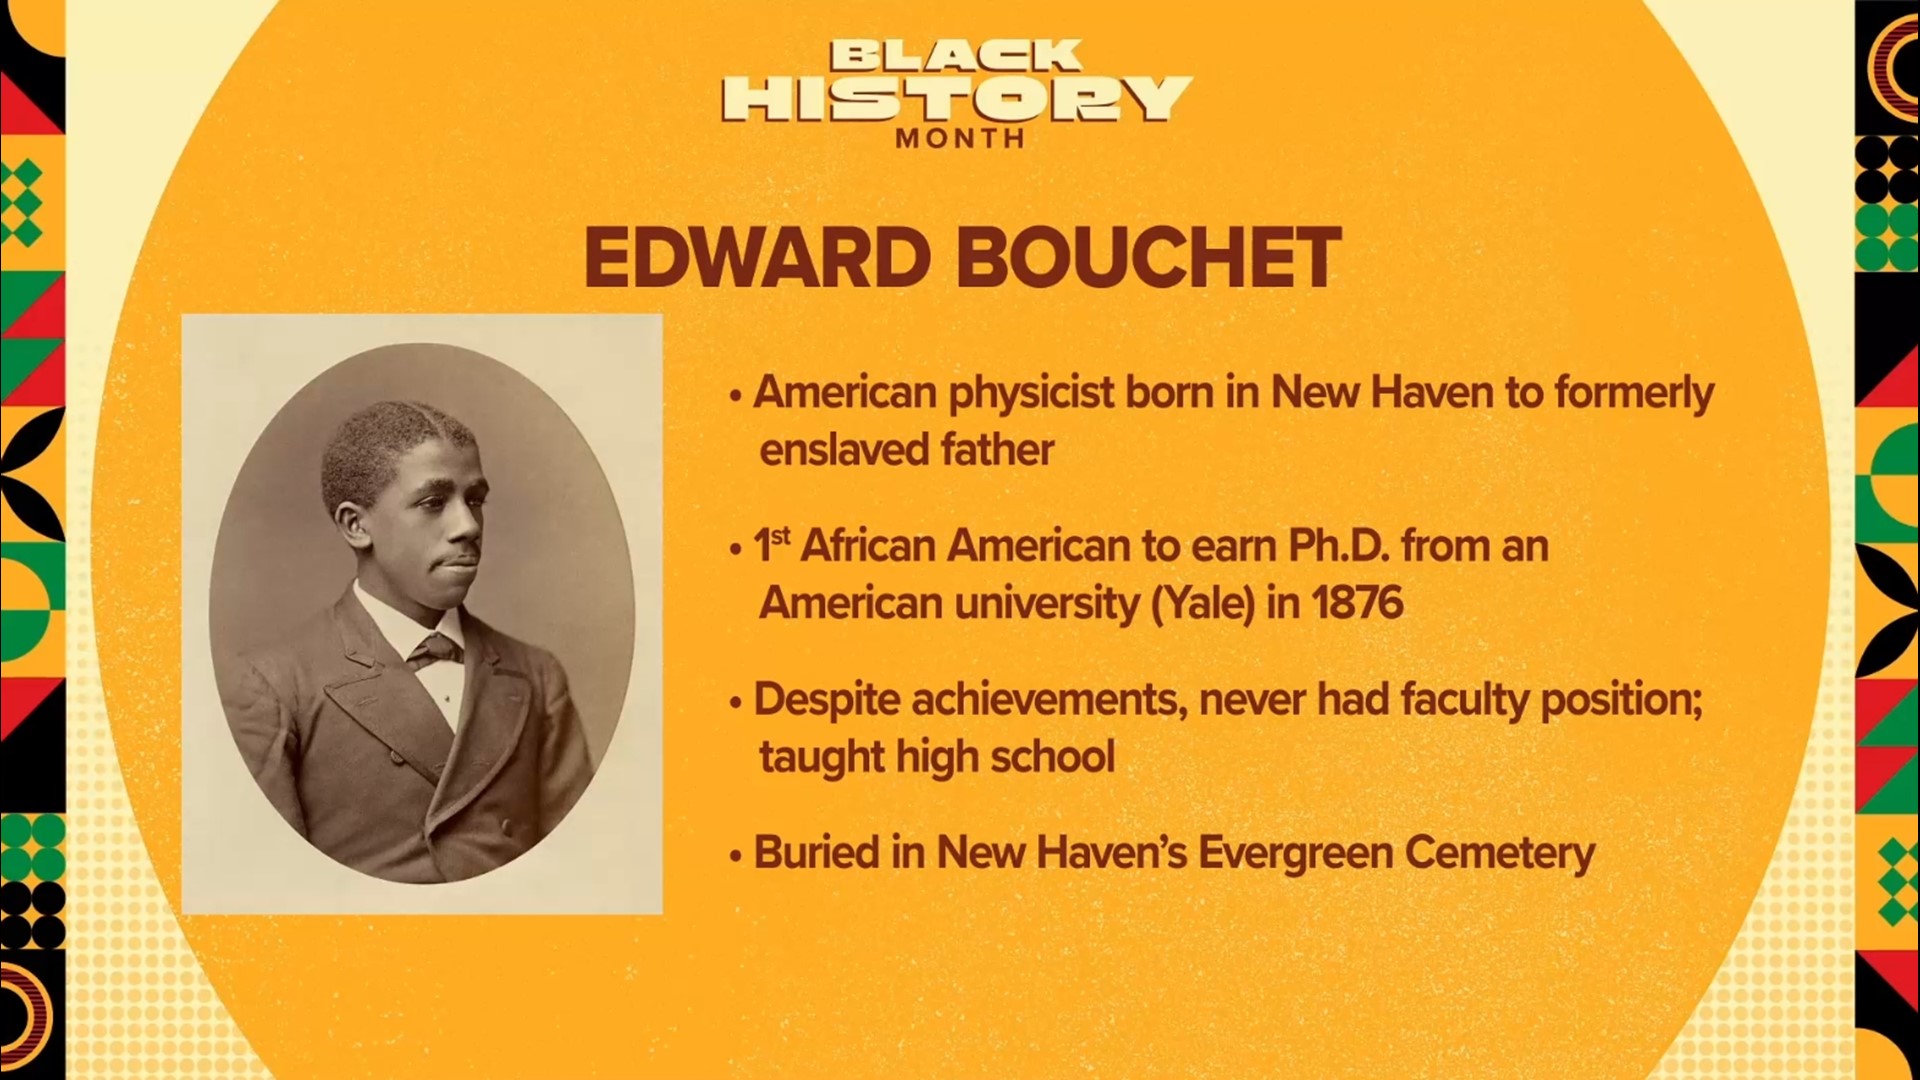 This is Edward Bouchet, a physicist born in New Haven, who was the first African American to earn a Ph.D. from an American university.